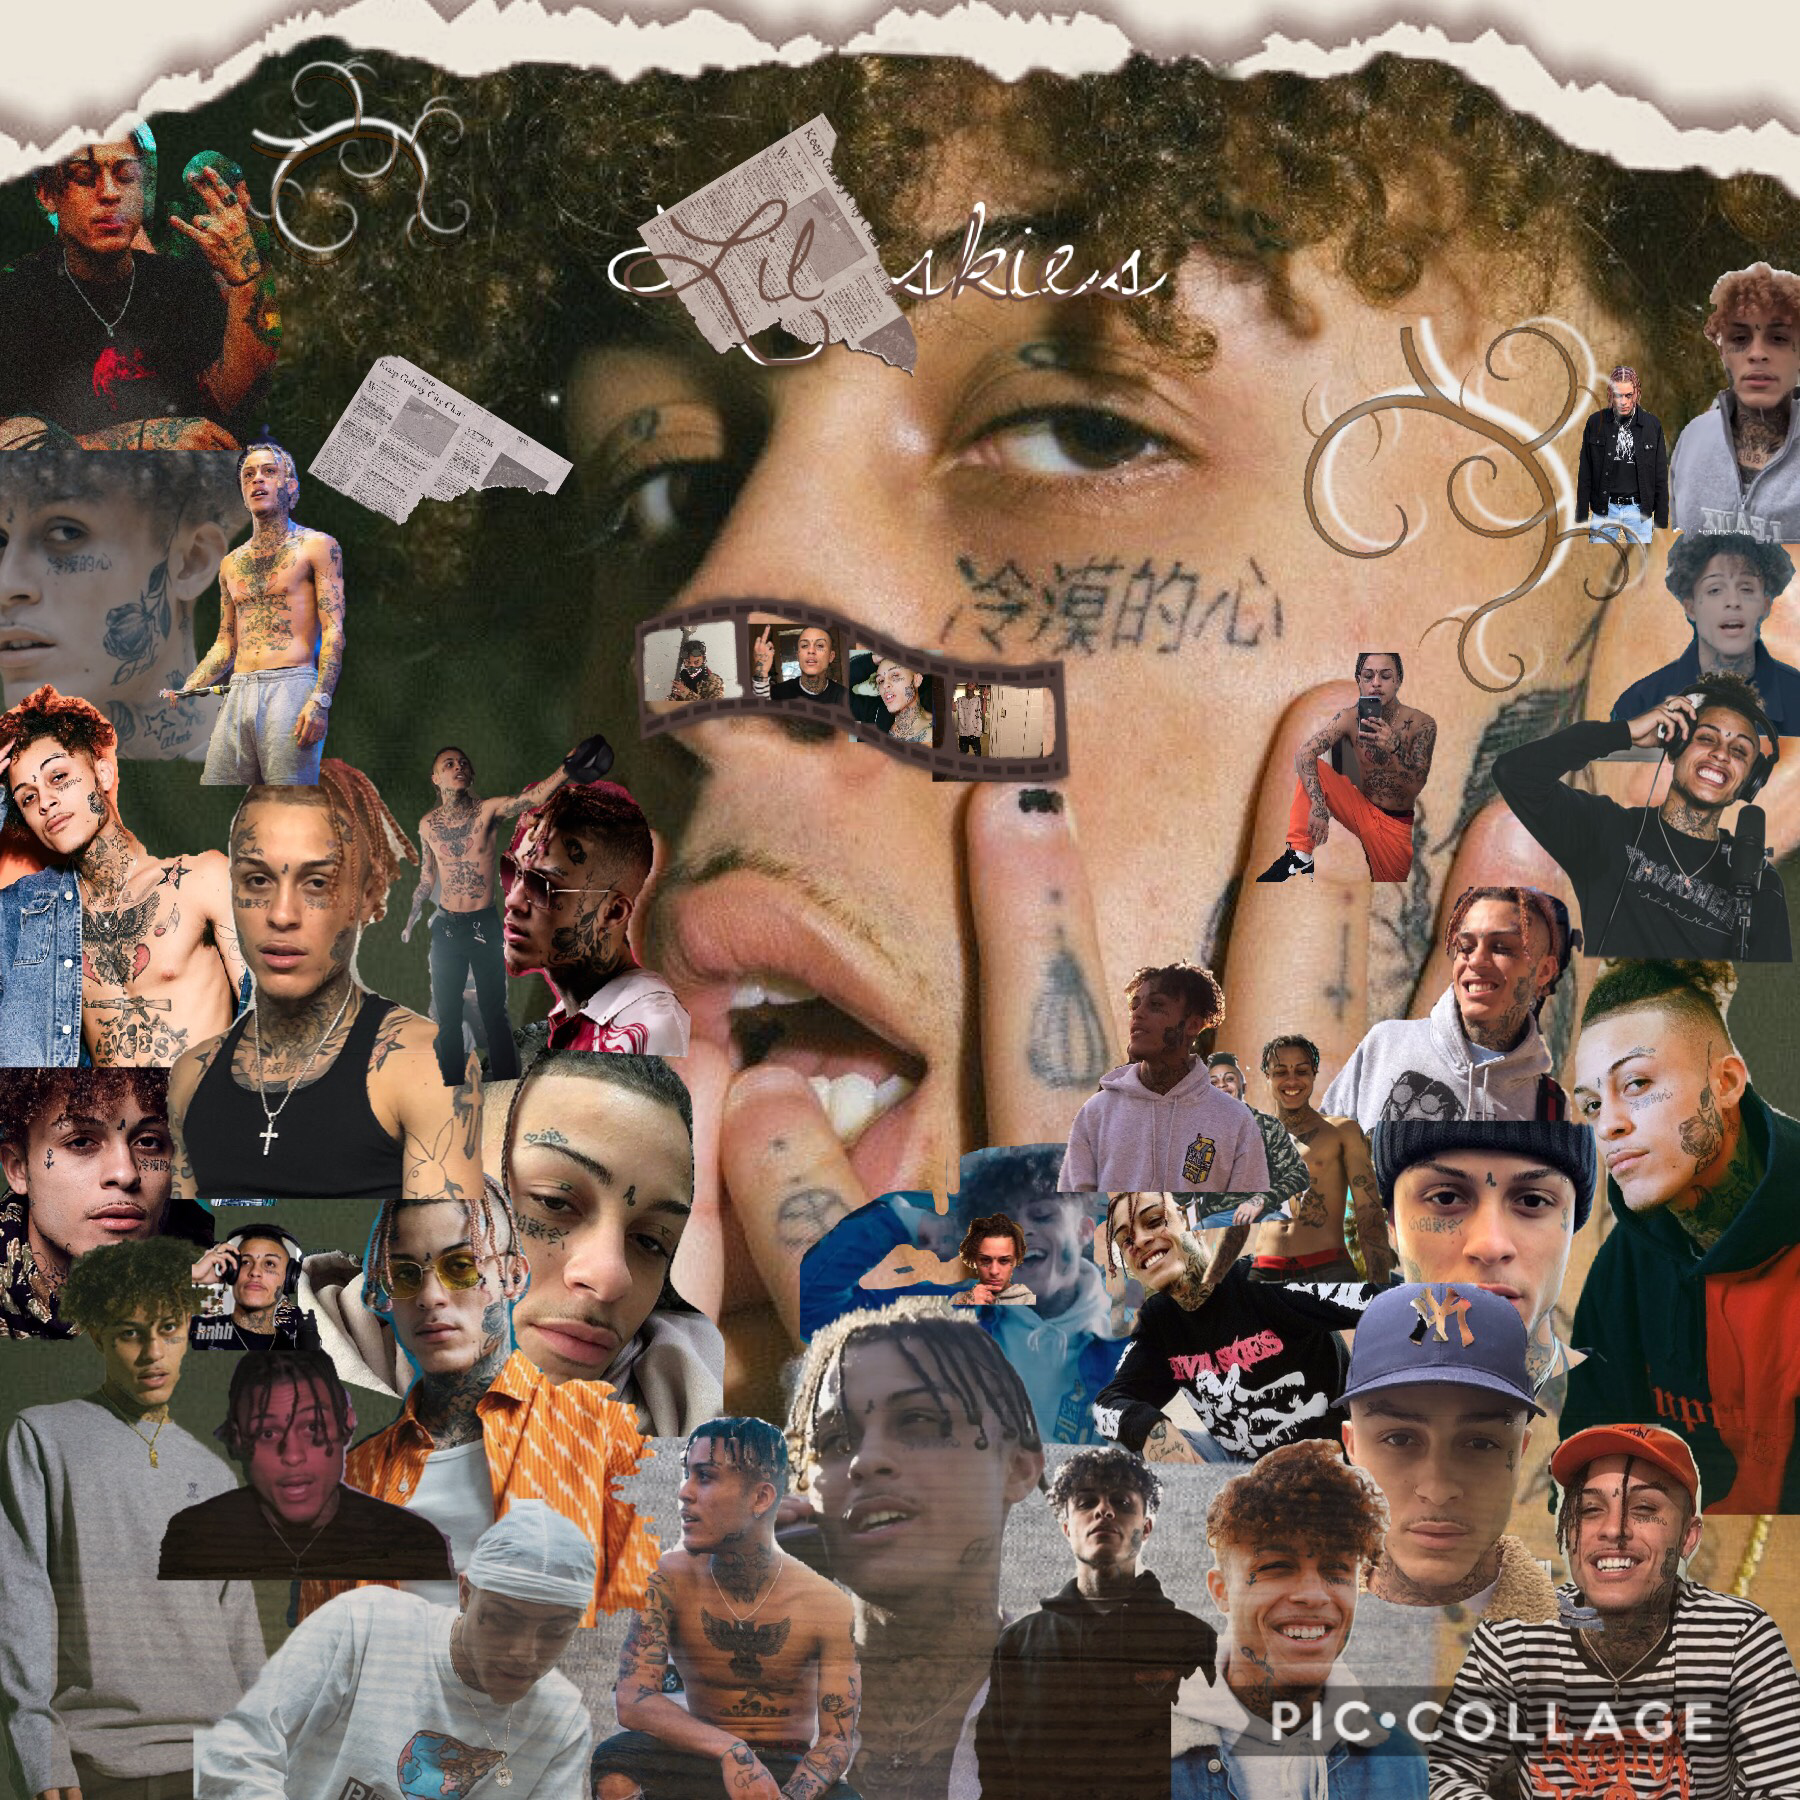 Tappppyy
Hope you guys like it❤️